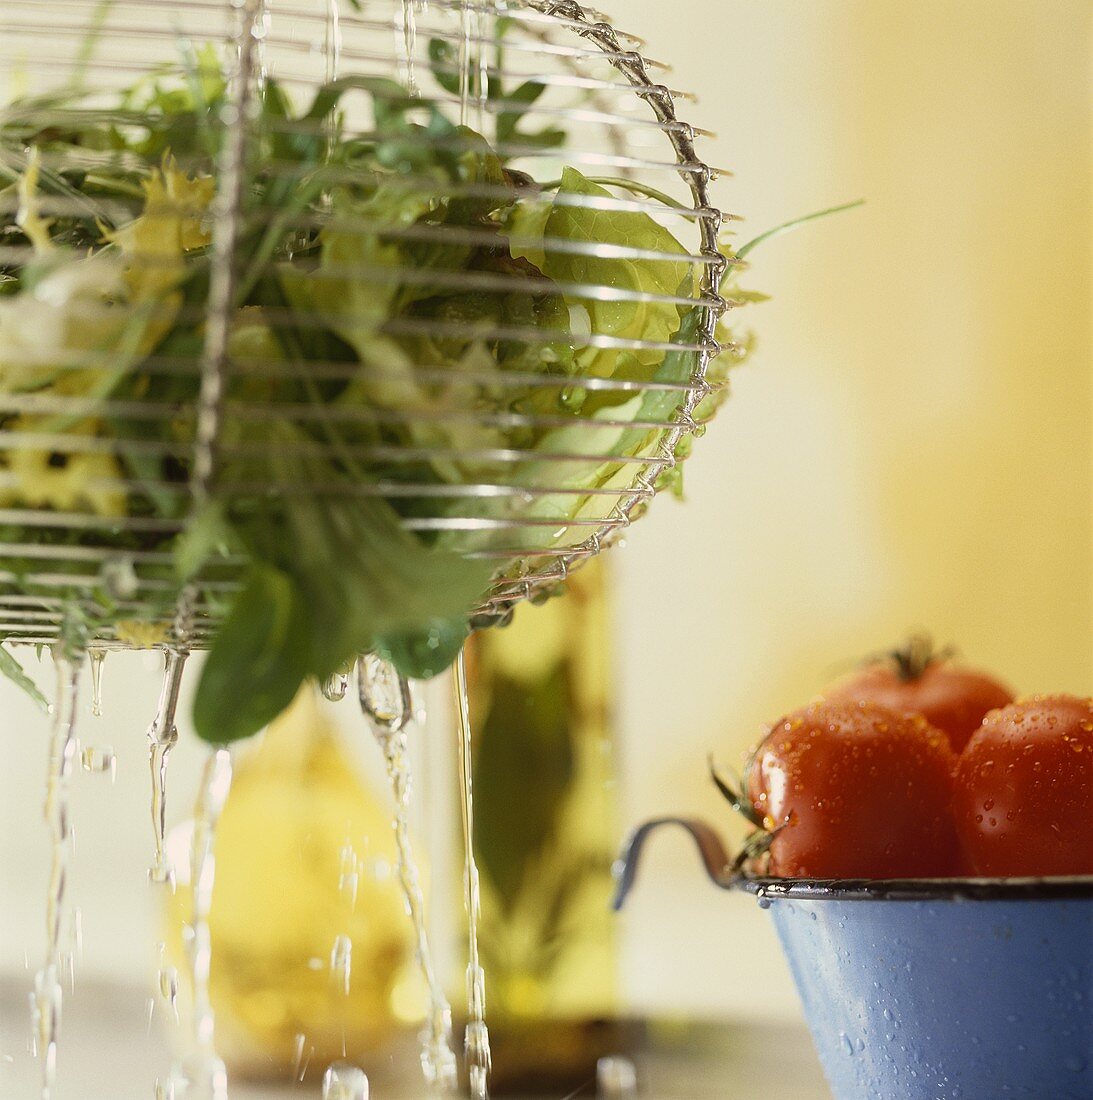 Salad in salad strainer and tomatoes